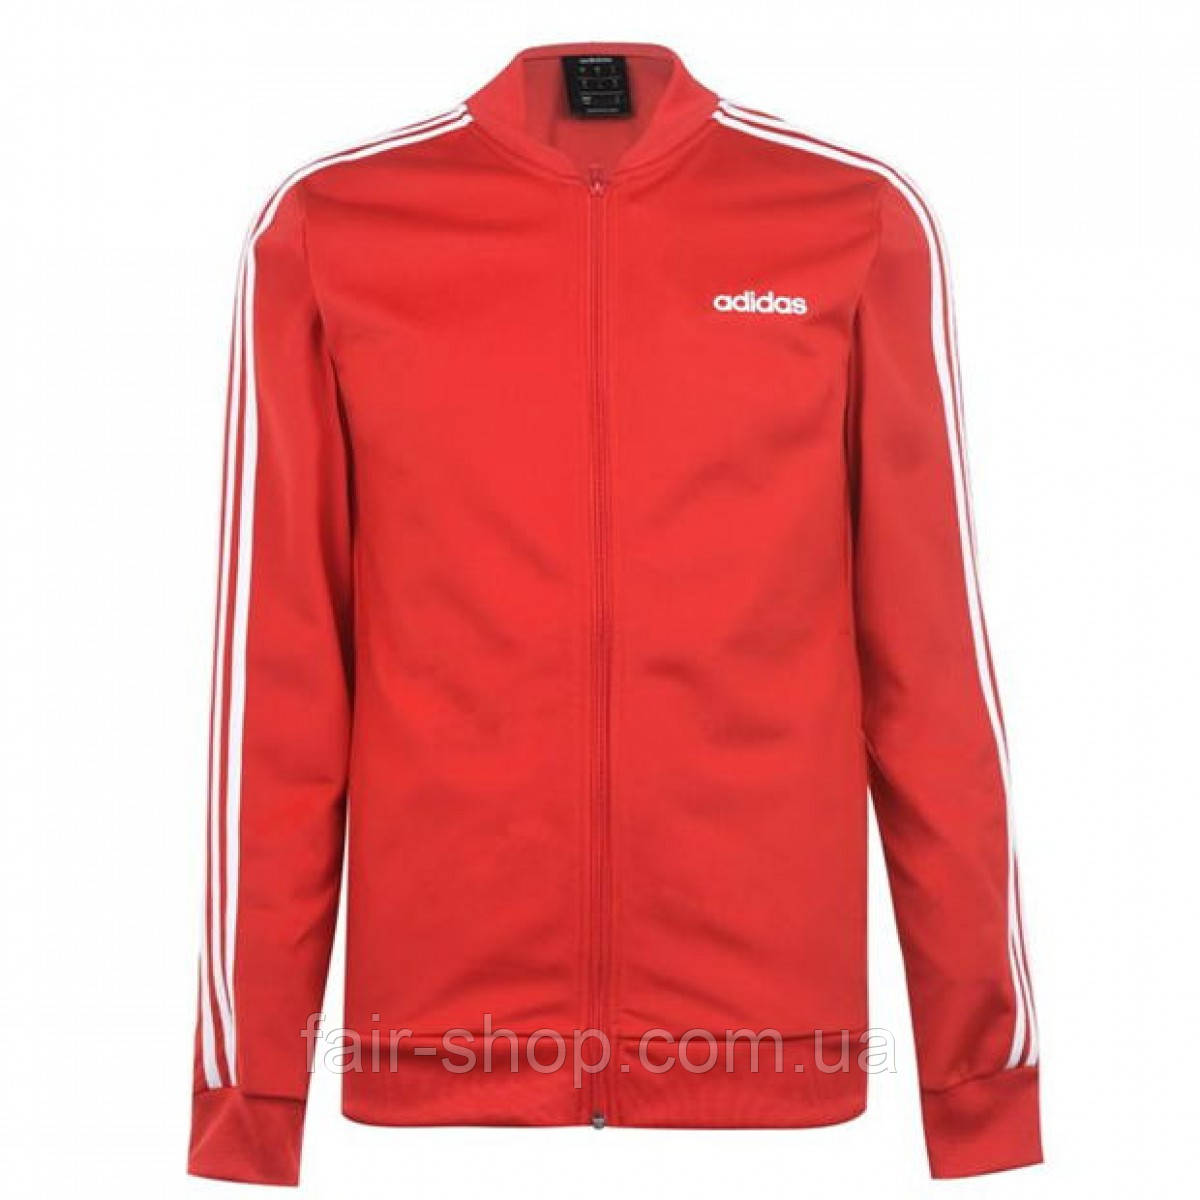 adidas 3S Poly Suit 02 Red/Blk/Wht 